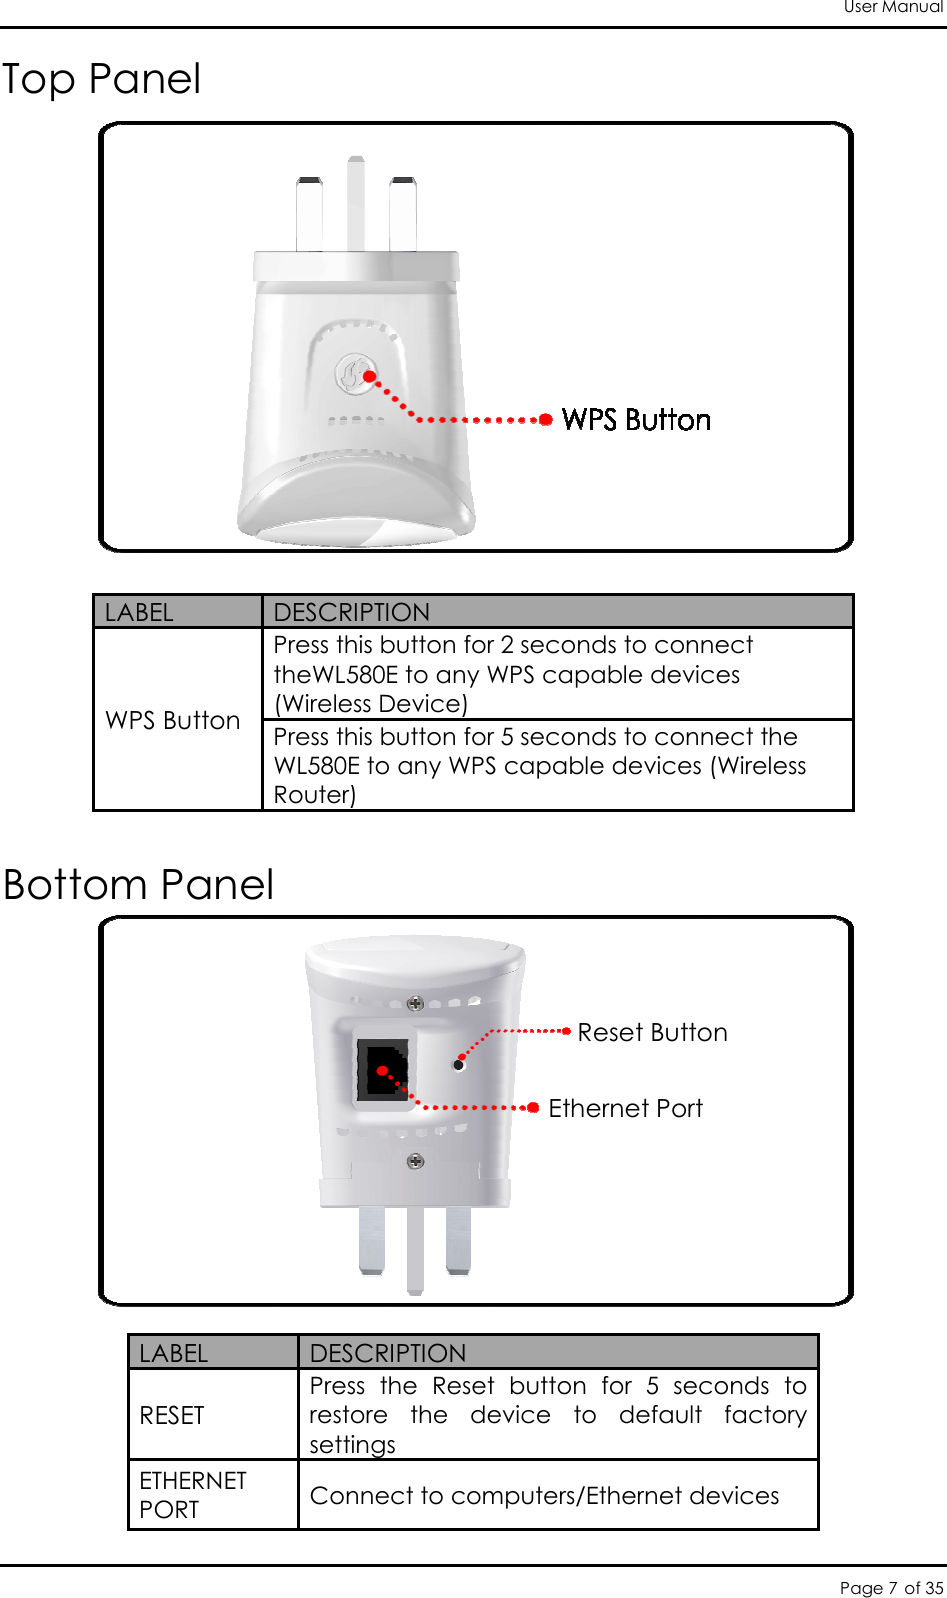 User Manual Page 7 of 35 Top Panel      Bottom Panel                     LABEL  DESCRIPTION WPS Button Press this button for 2 seconds to connect theWL580E to any WPS capable devices (Wireless Device) Press this button for 5 seconds to connect the WL580E to any WPS capable devices (Wireless Router)  LABEL  DESCRIPTION RESET Press  the  Reset  button  for  5  seconds  to restore  the  device  to  default  factory settings ETHERNET PORT Connect to computers/Ethernet devices   Ethernet Port Reset Button 